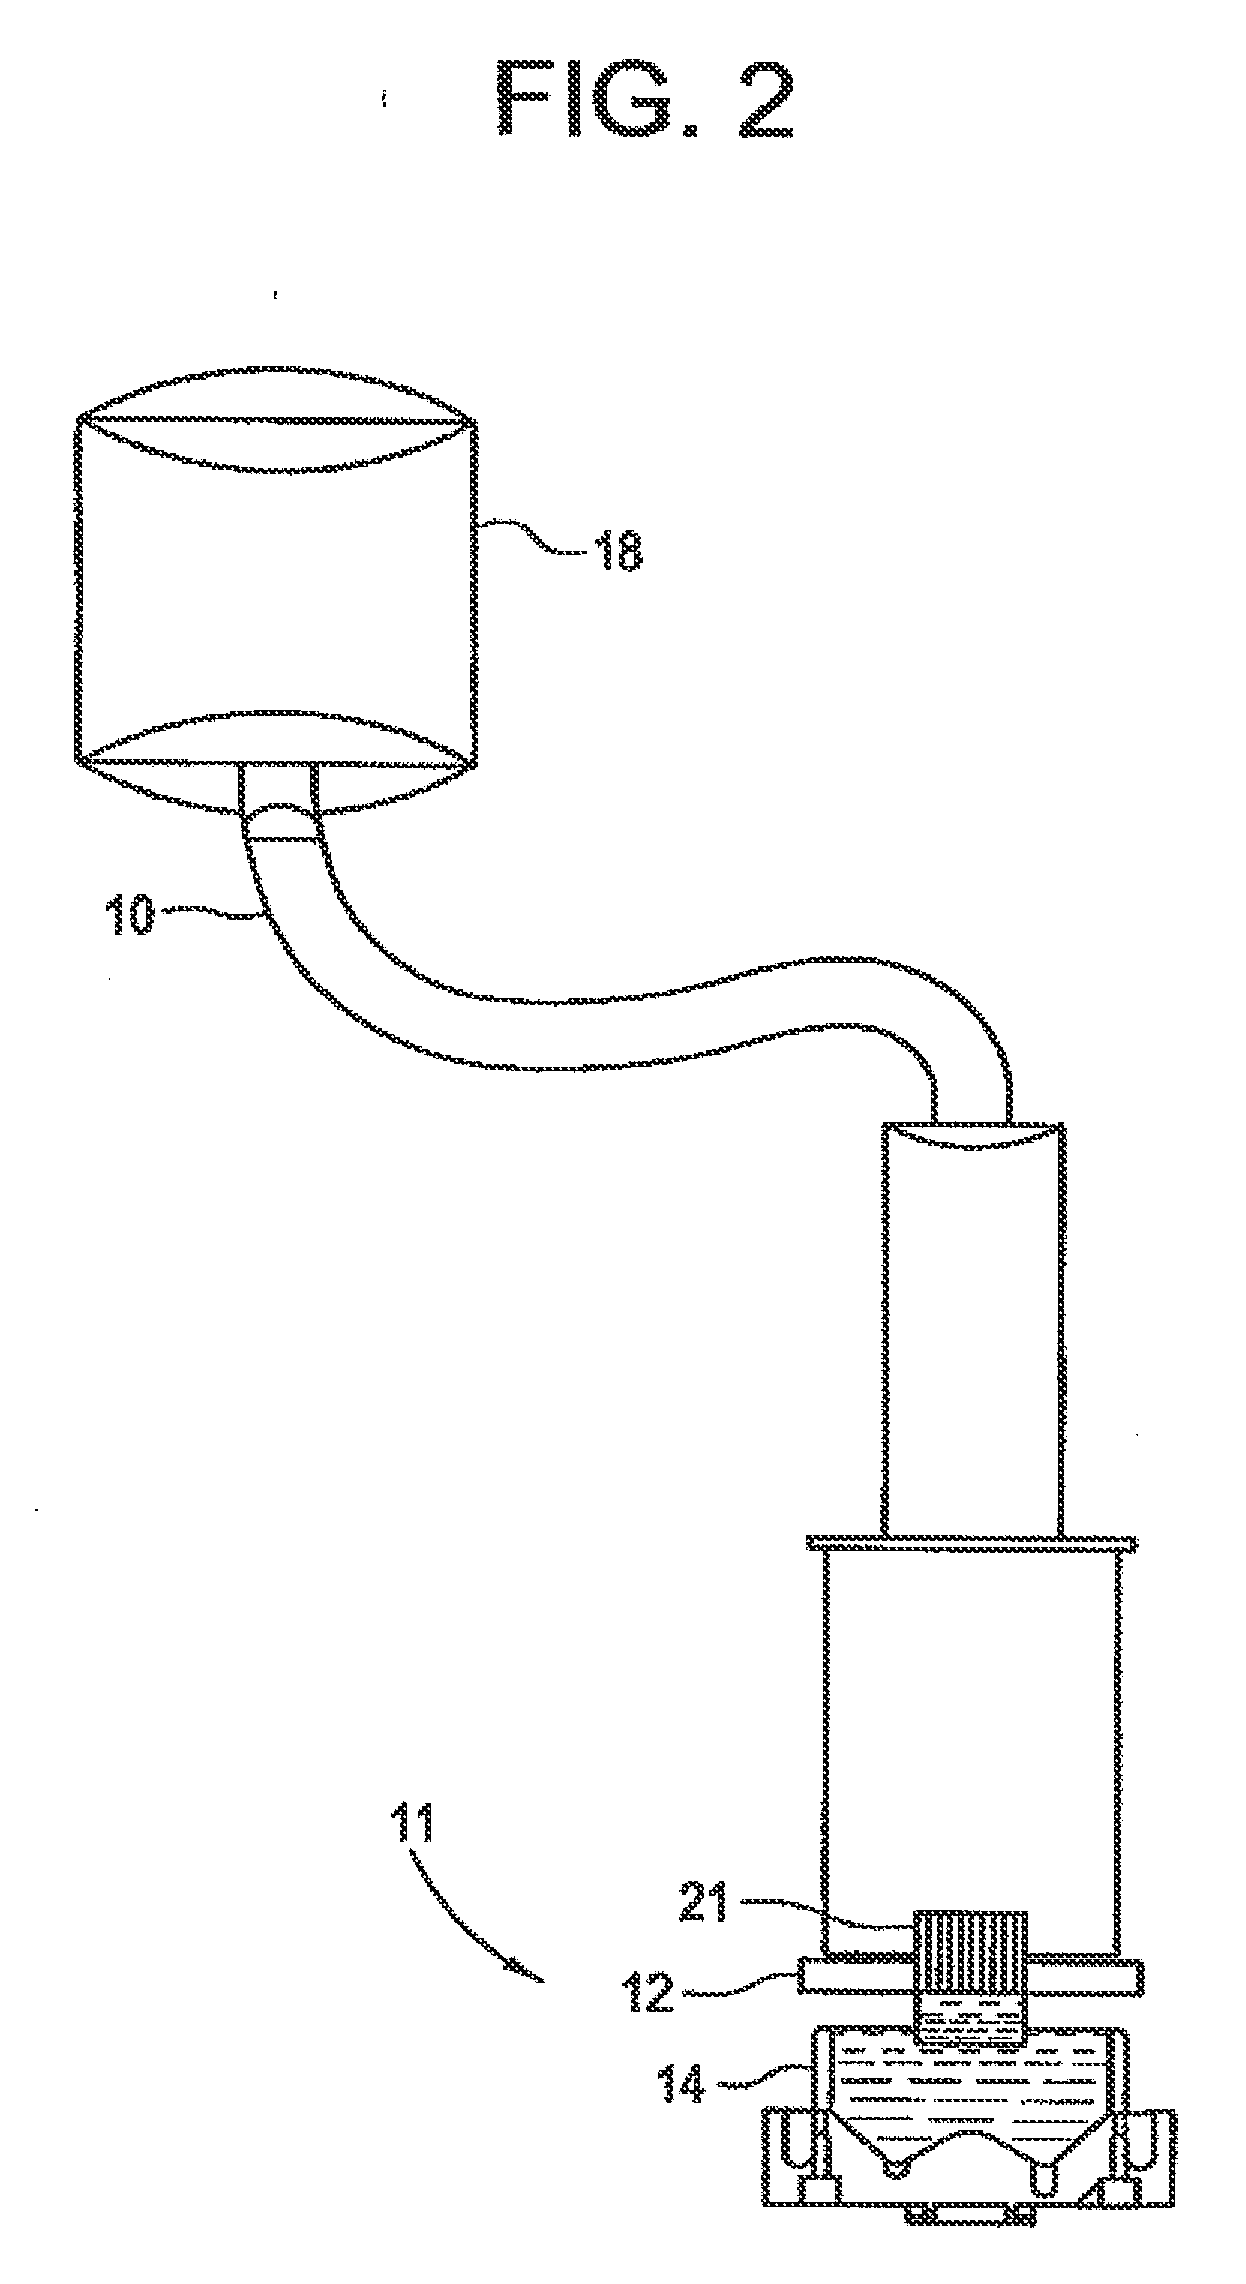 Method for Catalyst Coating of a Substrate